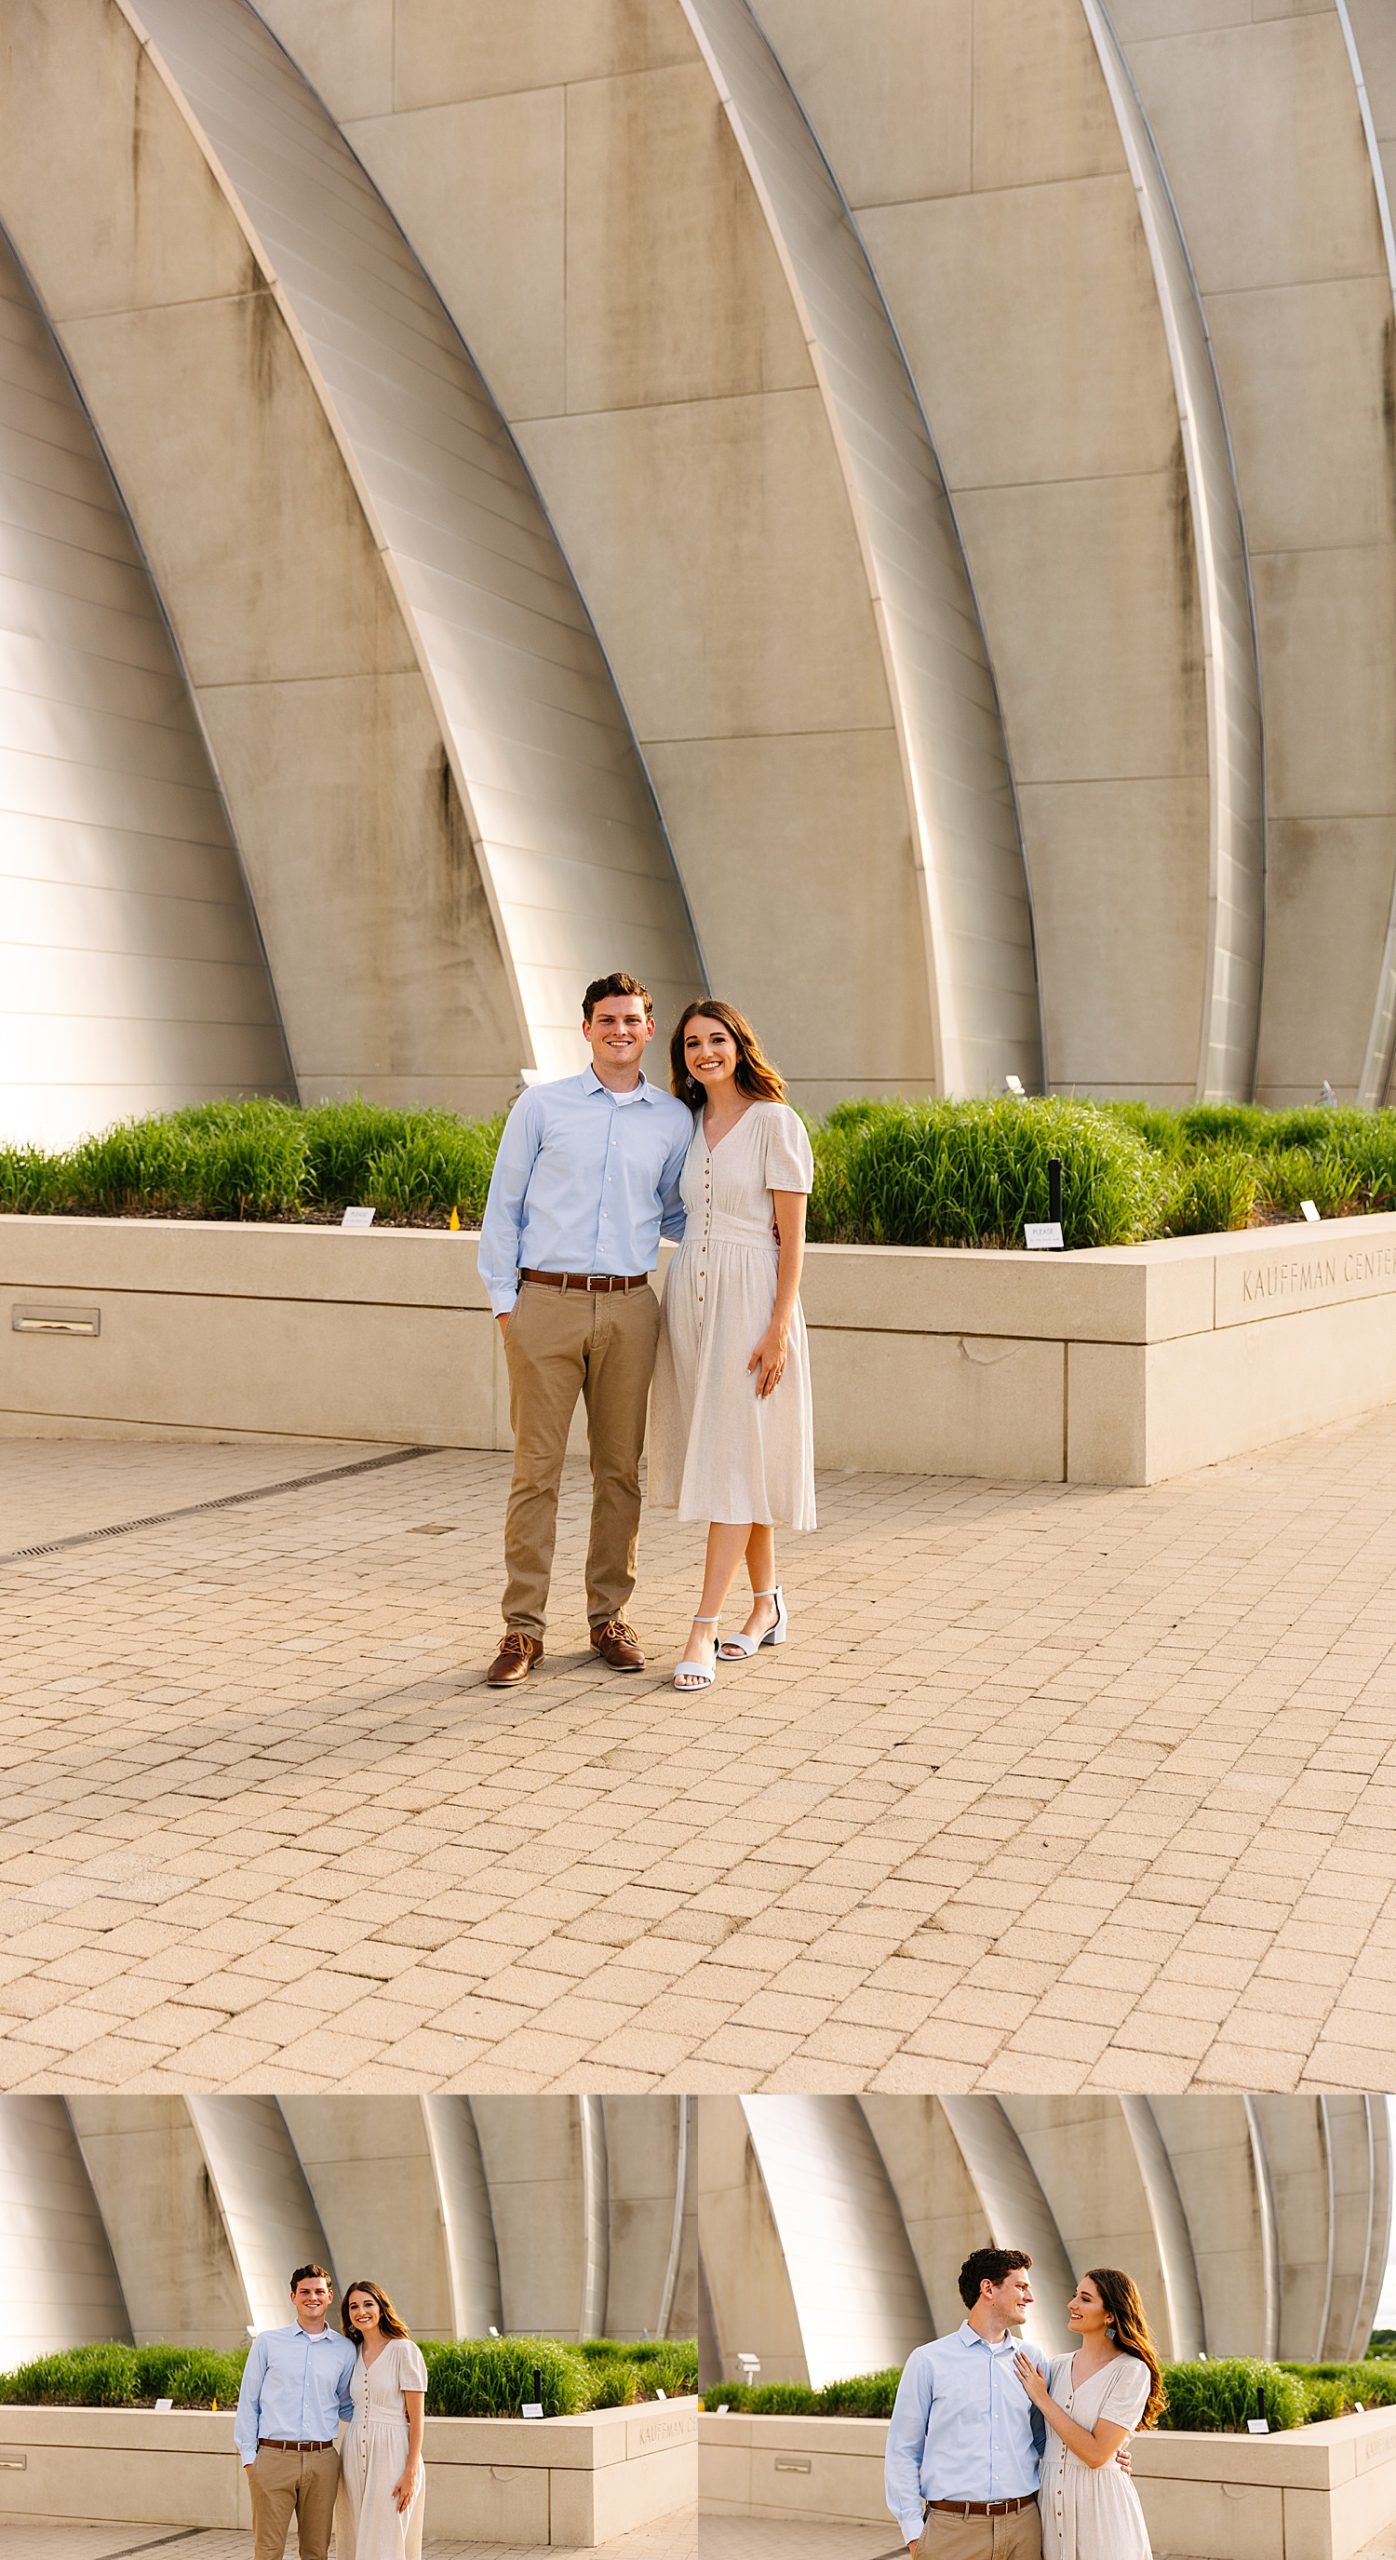 Kauffman Performing Arts Center engagement session with couple wearing dress and dress shirt 